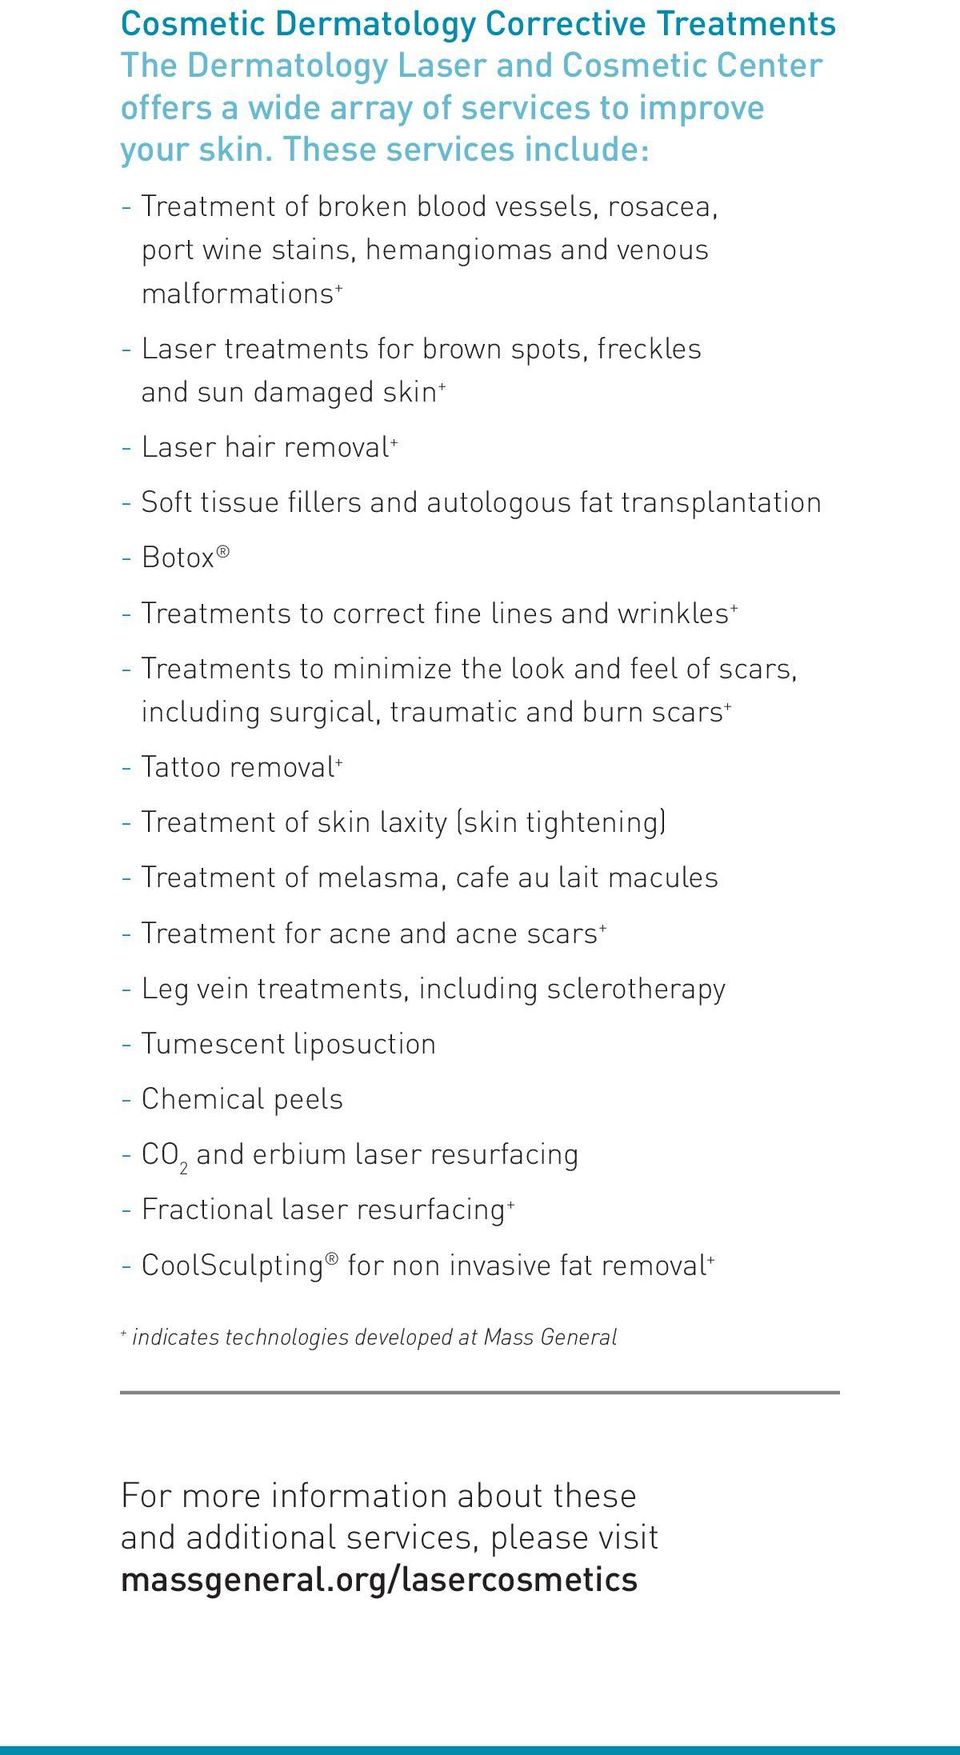 Laser hair removal + - Soft tissue fillers and autologous fat transplantation - Botox - Treatments to correct fine lines and wrinkles + - Treatments to minimize the look and feel of scars, including